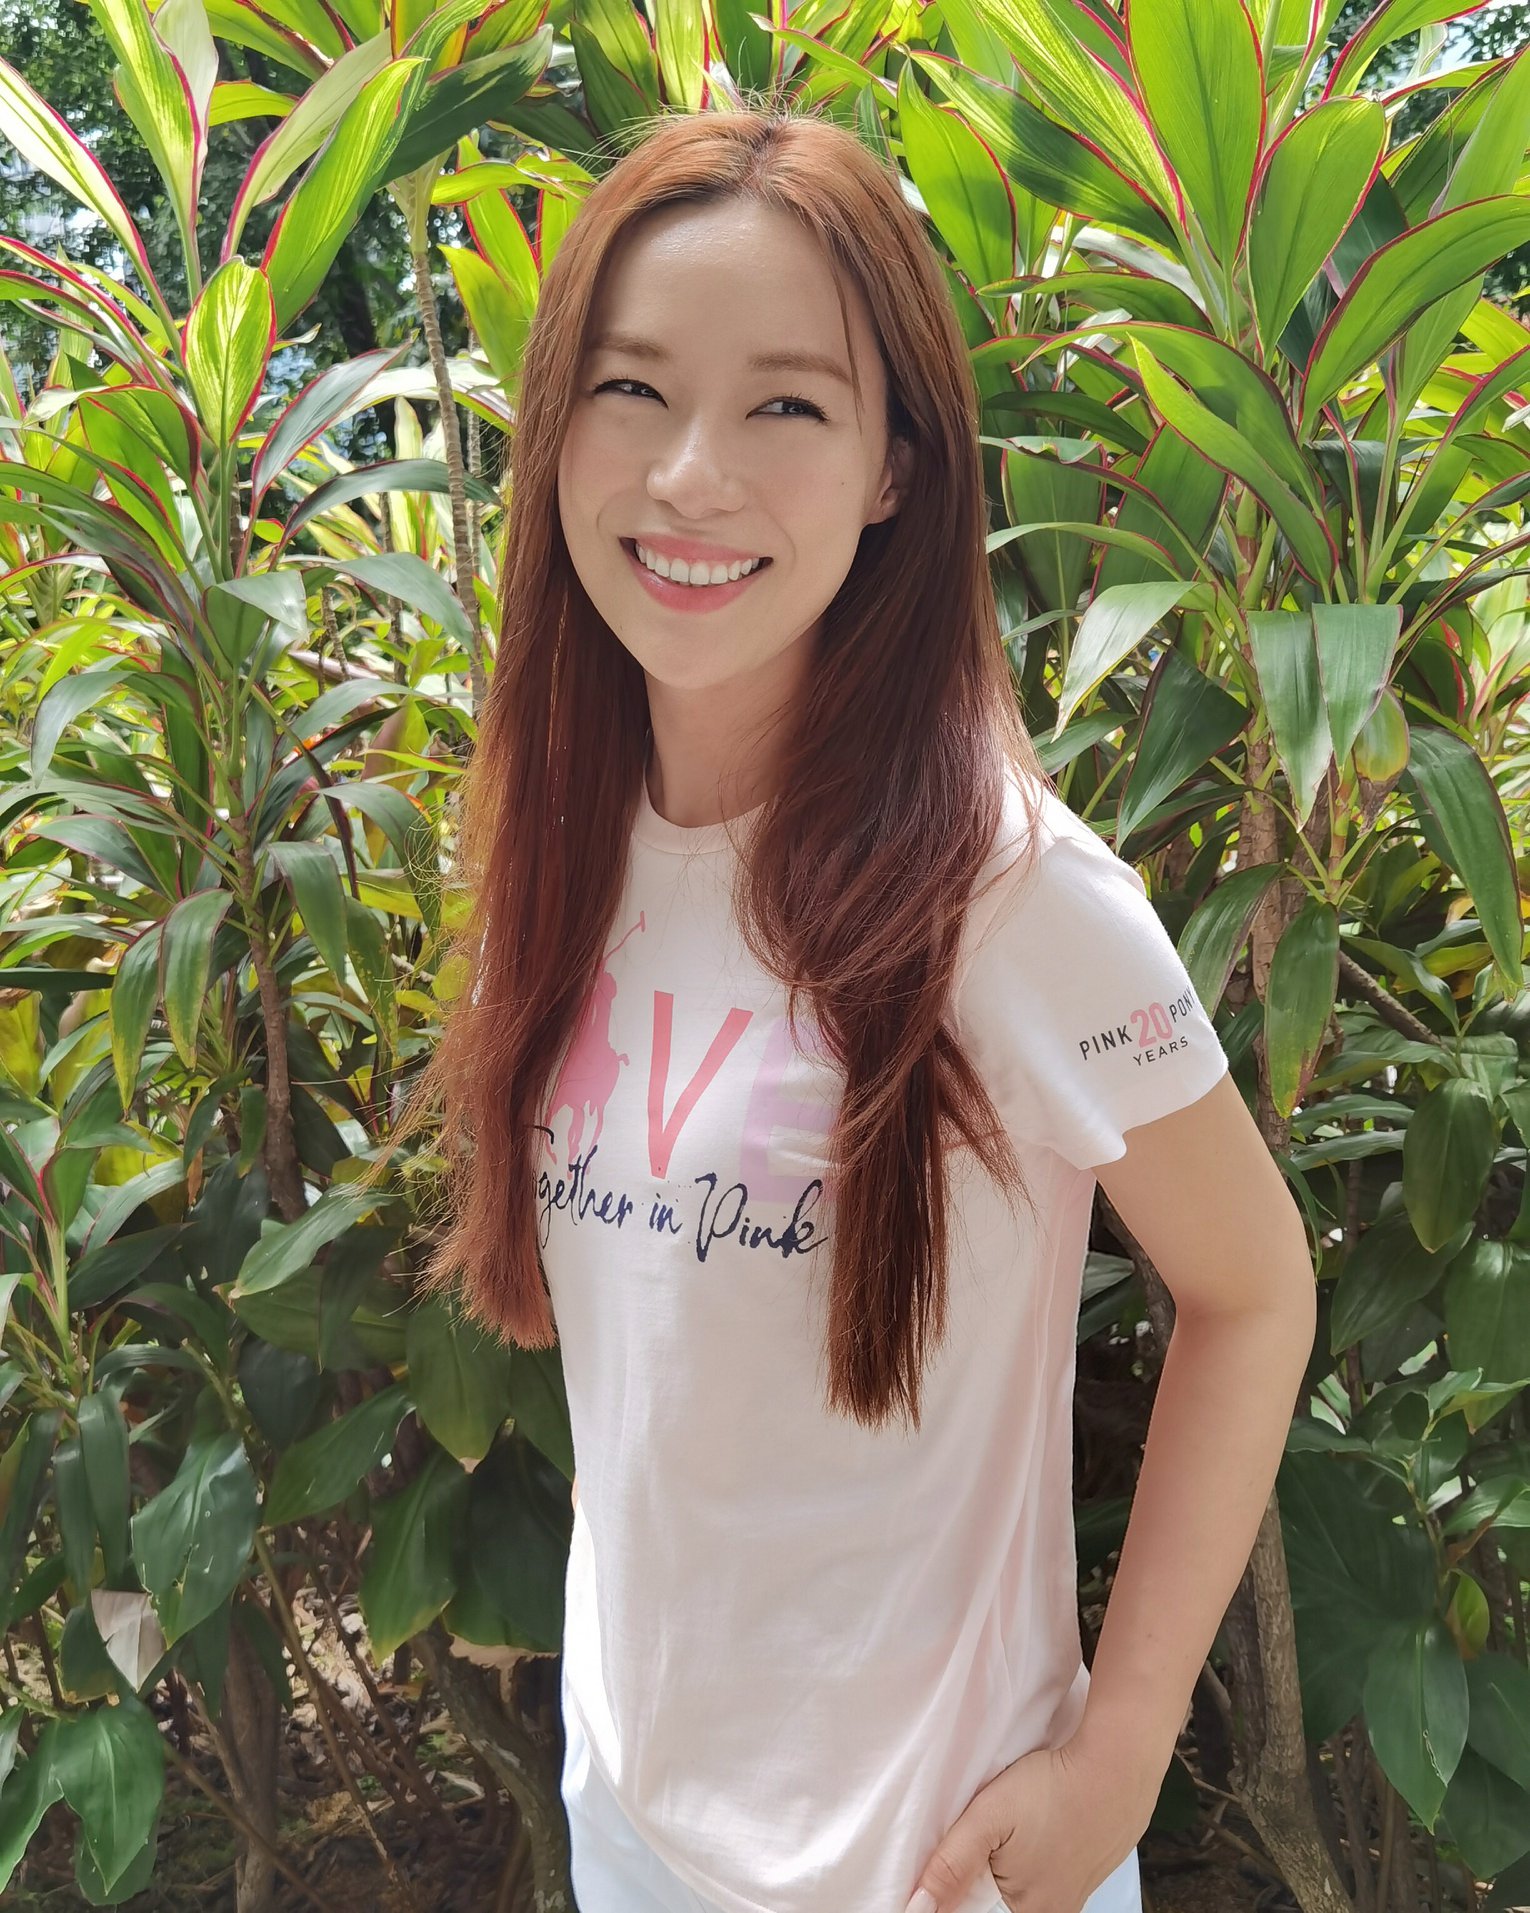 Actress Rebecca Lim 林慧玲 supports #PinkPony wearing the Pink Pony Live/Love tee, of which 100% of the purchase price is donated to the Pink Pony Fund of the Polo Ralph Lauren Foundation or to an international network of cancer charities. Discover the full Pink Pony collection and how you can support: